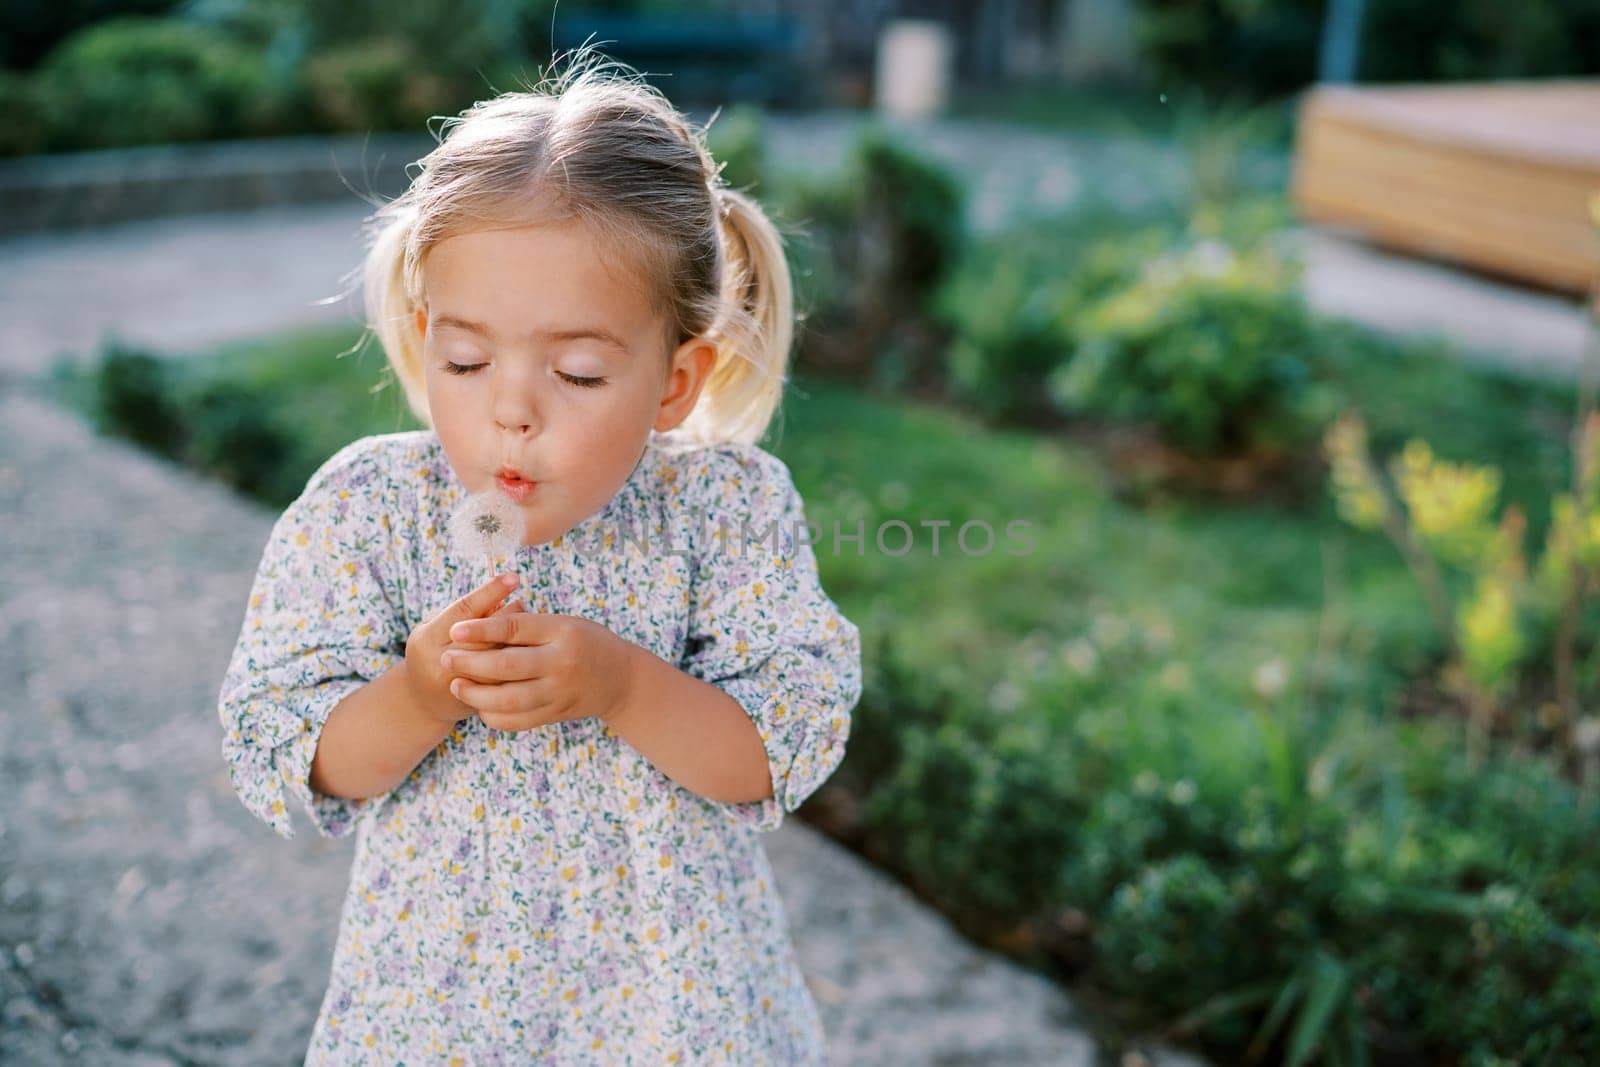 Little girl with closed eyes blows on a dandelion while standing on a path in the garden. High quality photo